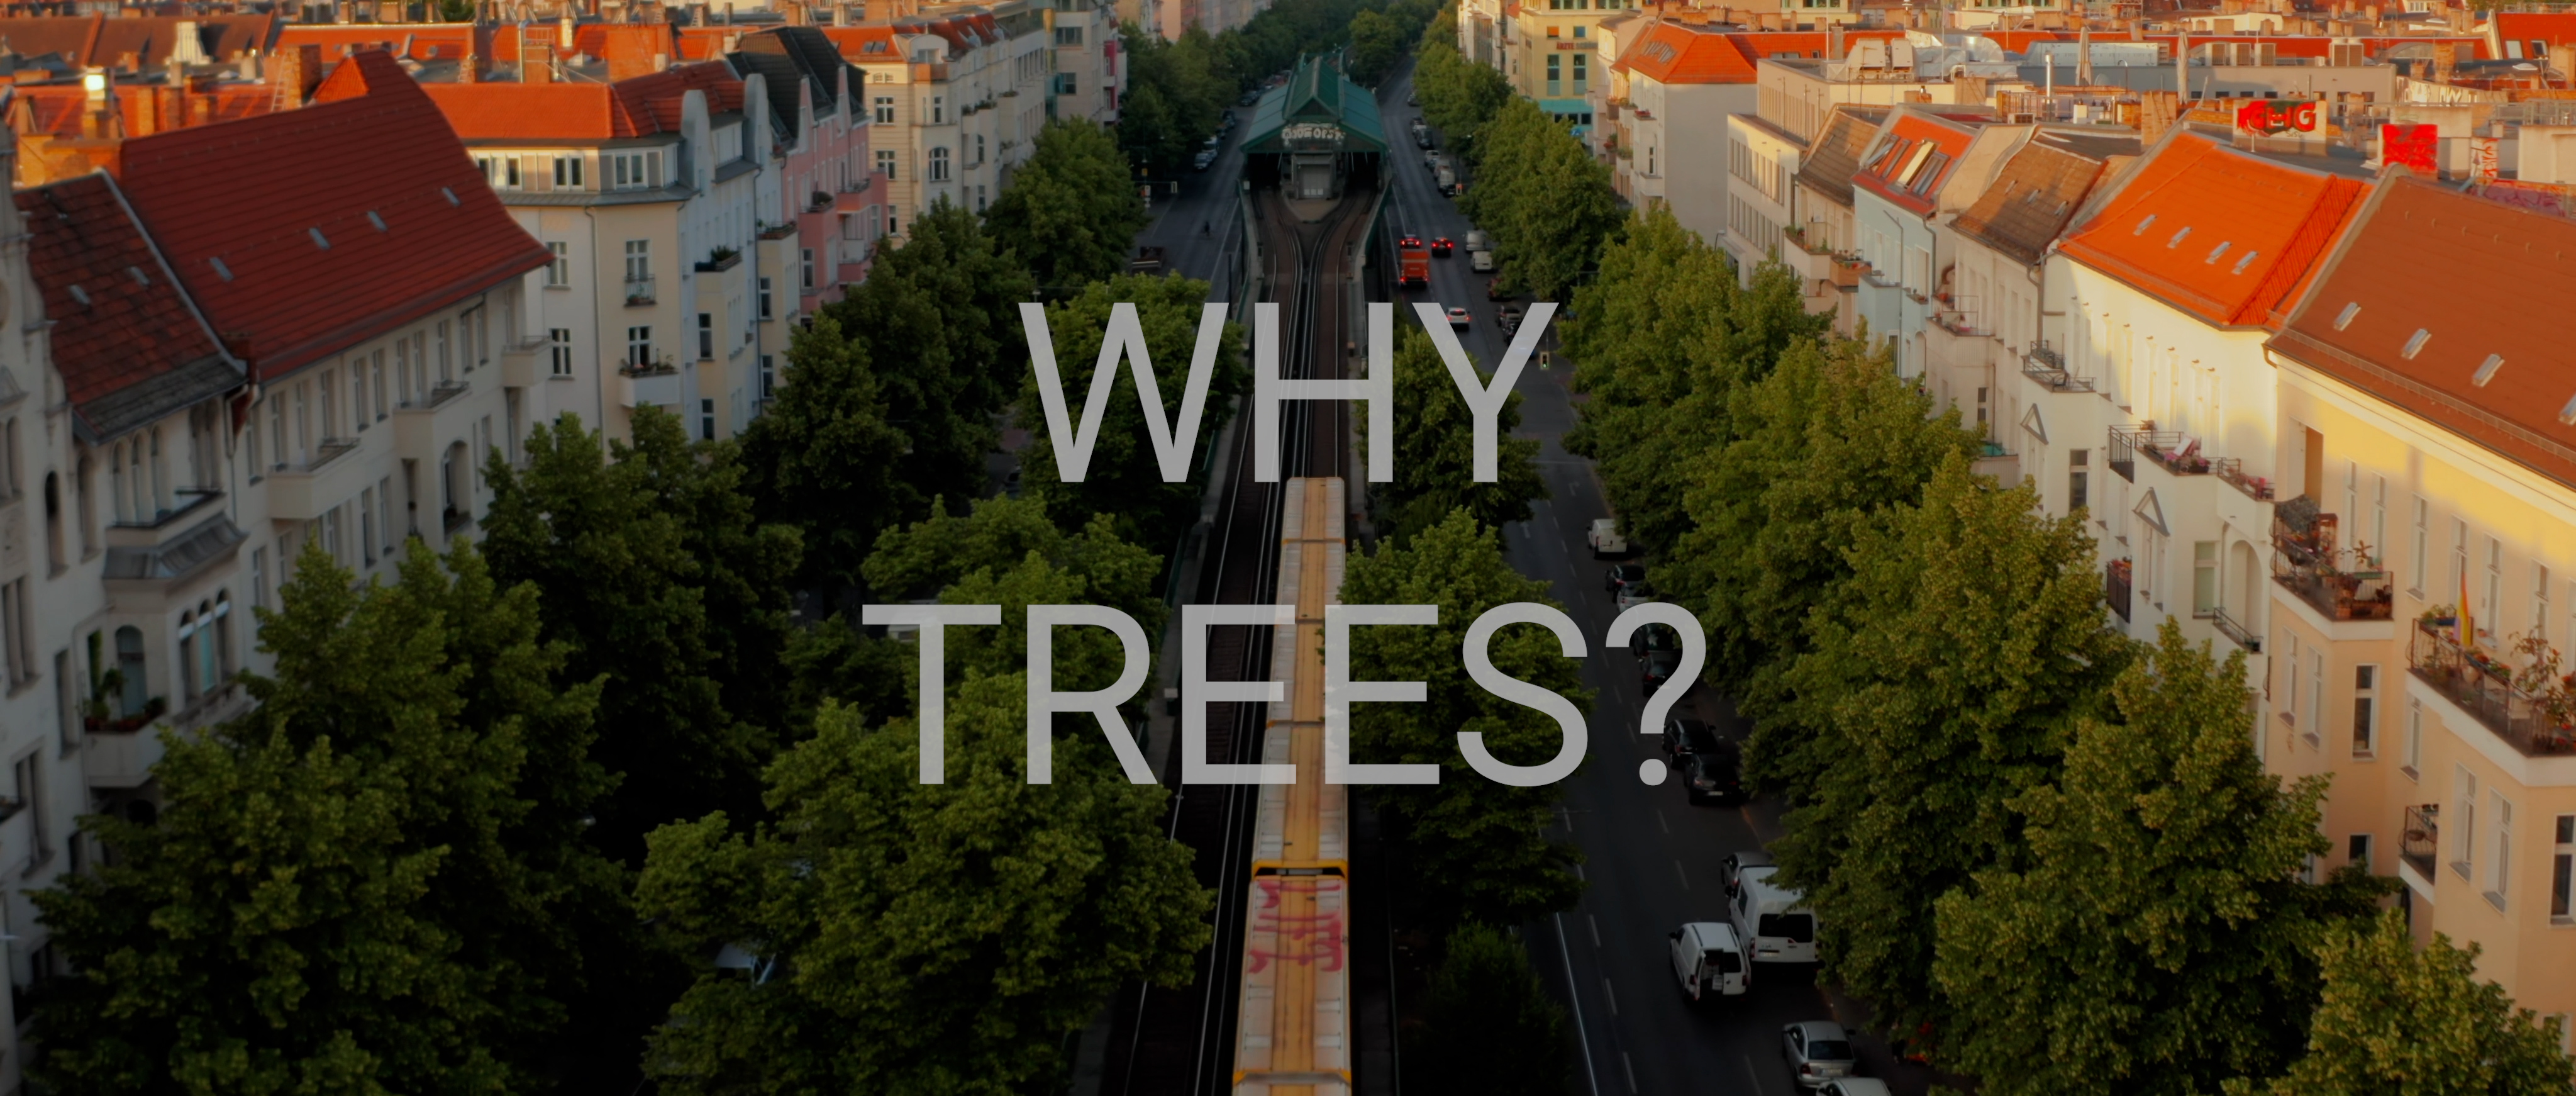 Why trees?